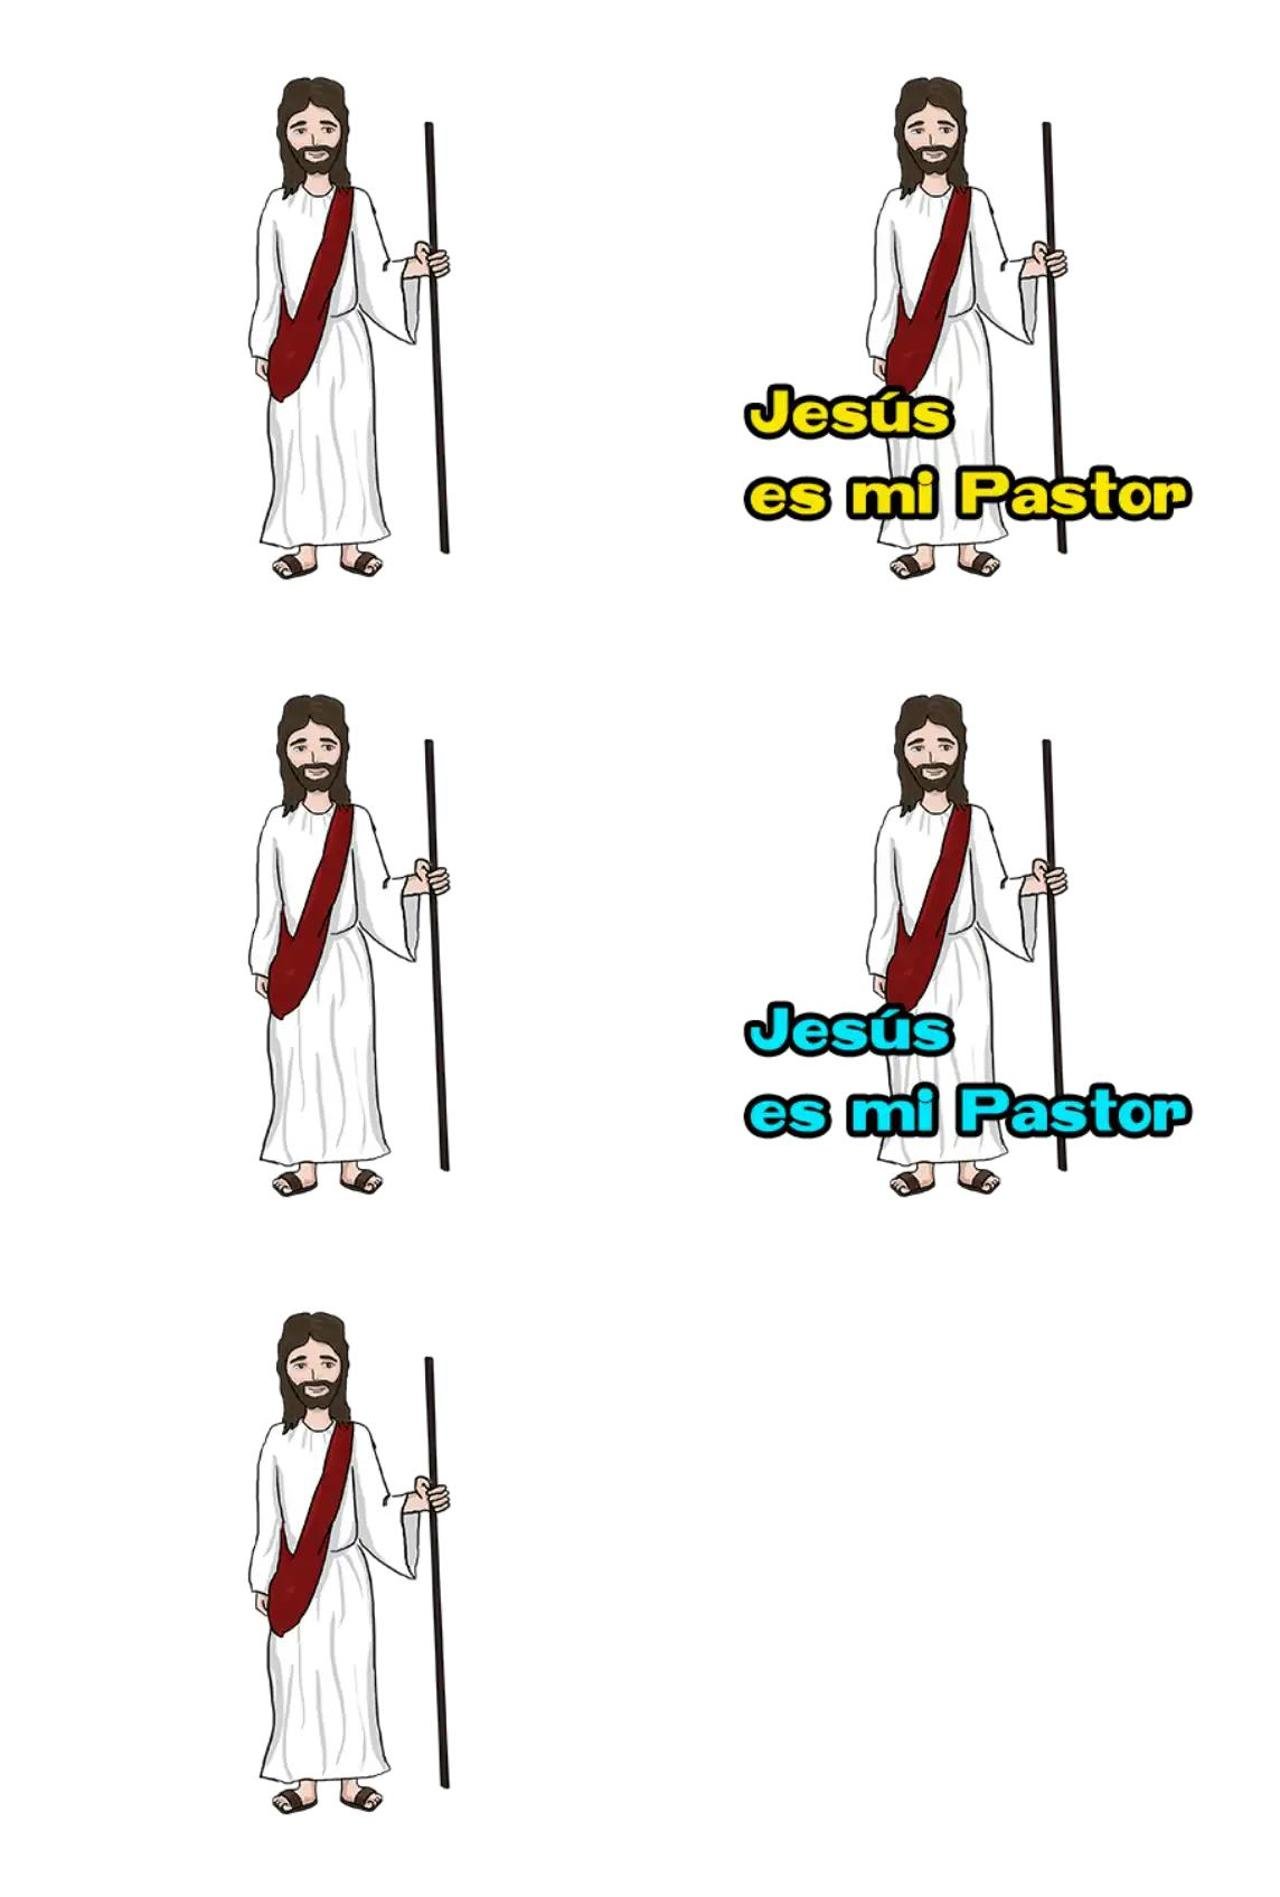 Jesus es mi Pastor Animation/Cartoon sticker pack for Whatsapp, Telegram, Signal, and others chatting and message apps